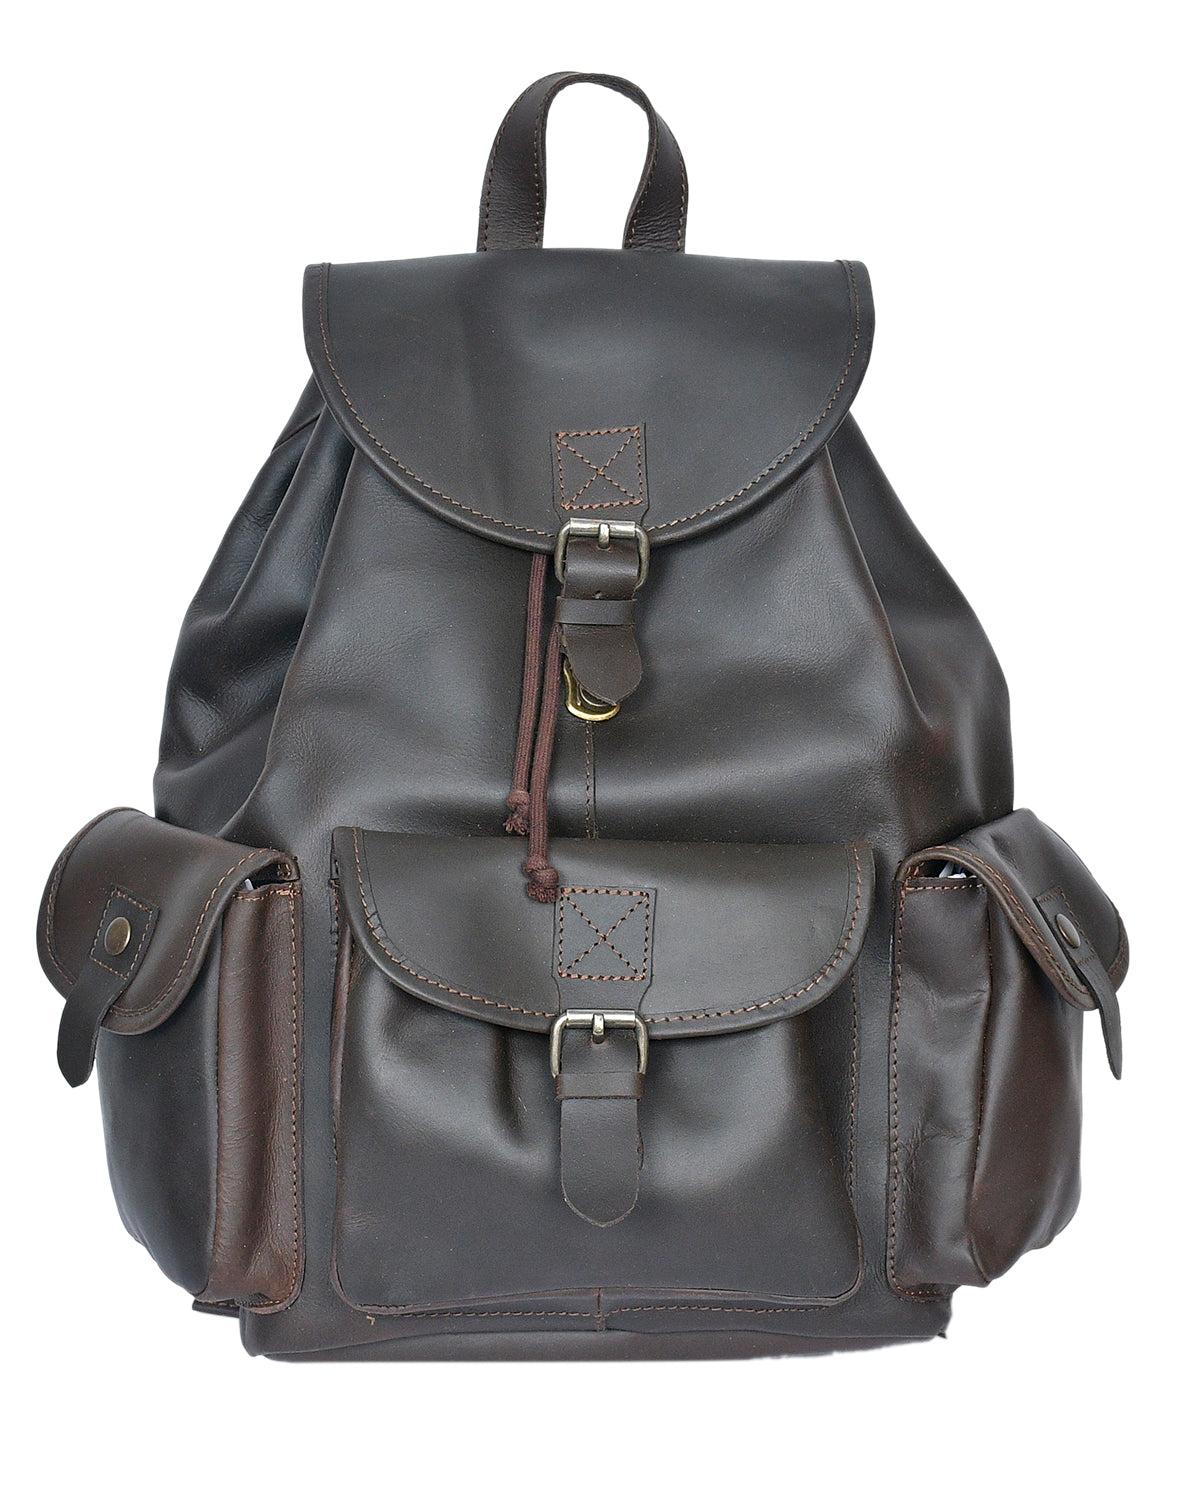 Brown Leather Backpack: Timeless Style and Versatility - CELTICINDIA